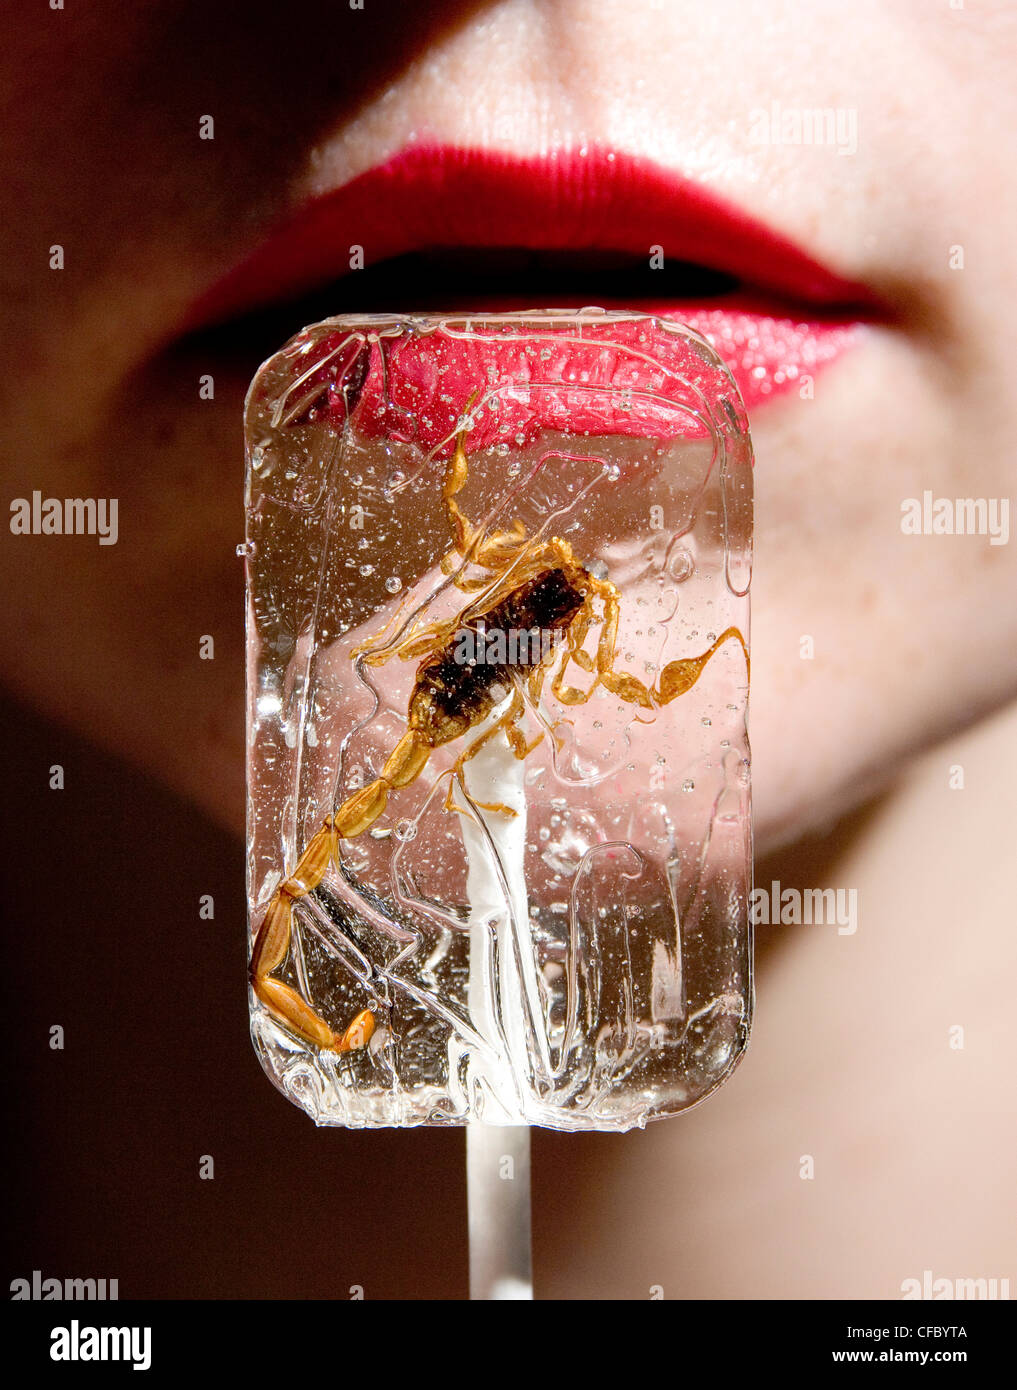 Horoscopes Scorpio A female wearing red lipstick with a scorpion lolly Stock Photo